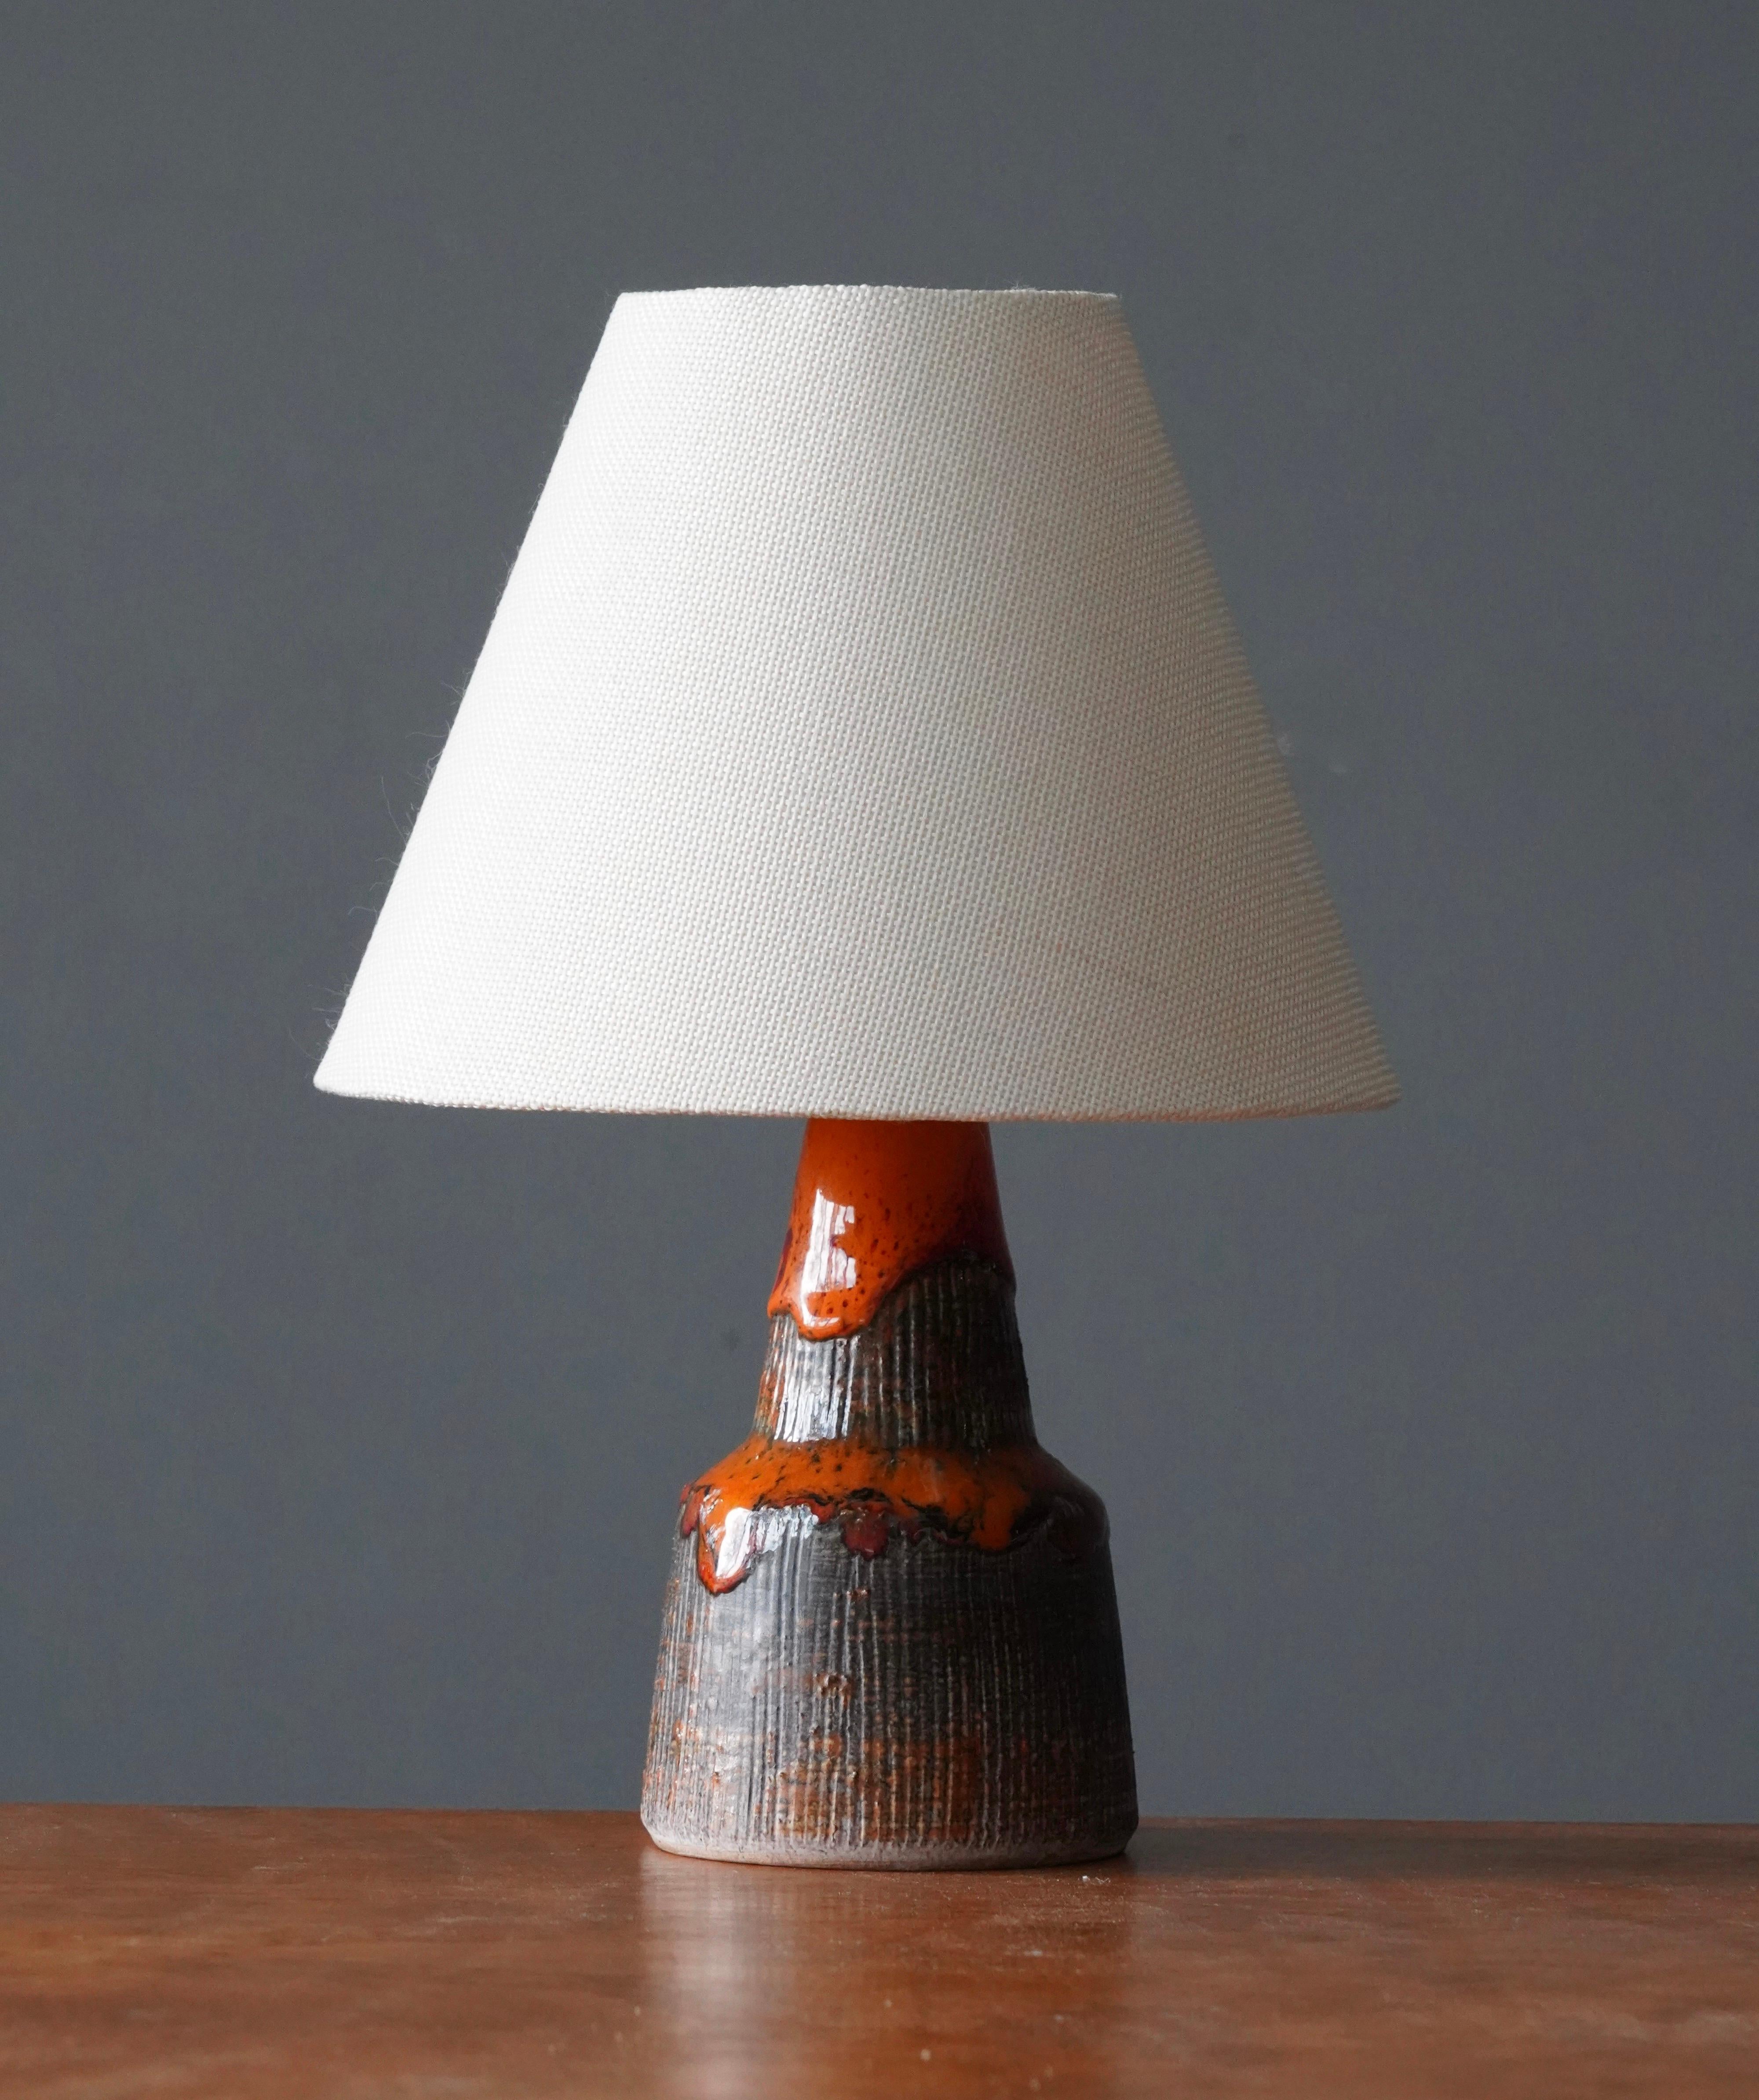 A glazed stoneware table lamp. By Tilgmans Keramik, 1950s. Features a complex glaze combined with incised decor in a style iconic to the producer. Features brown, orange and red tones.

Dimensions listed are without lampshade. Height includes